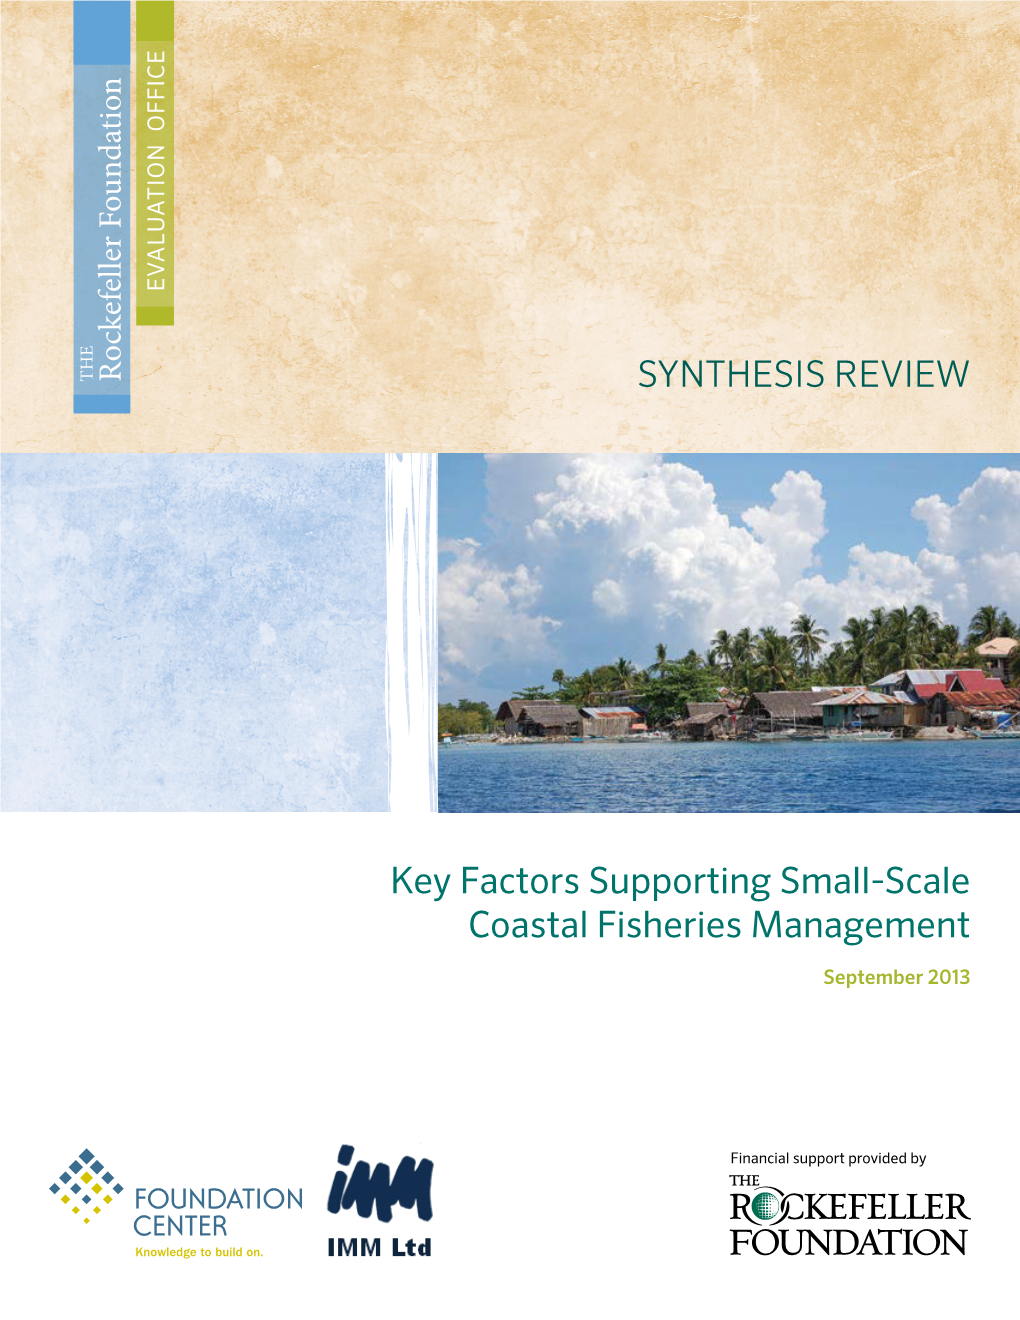 Key Factors Supporting Small-Scale Coastal Fisheries Management